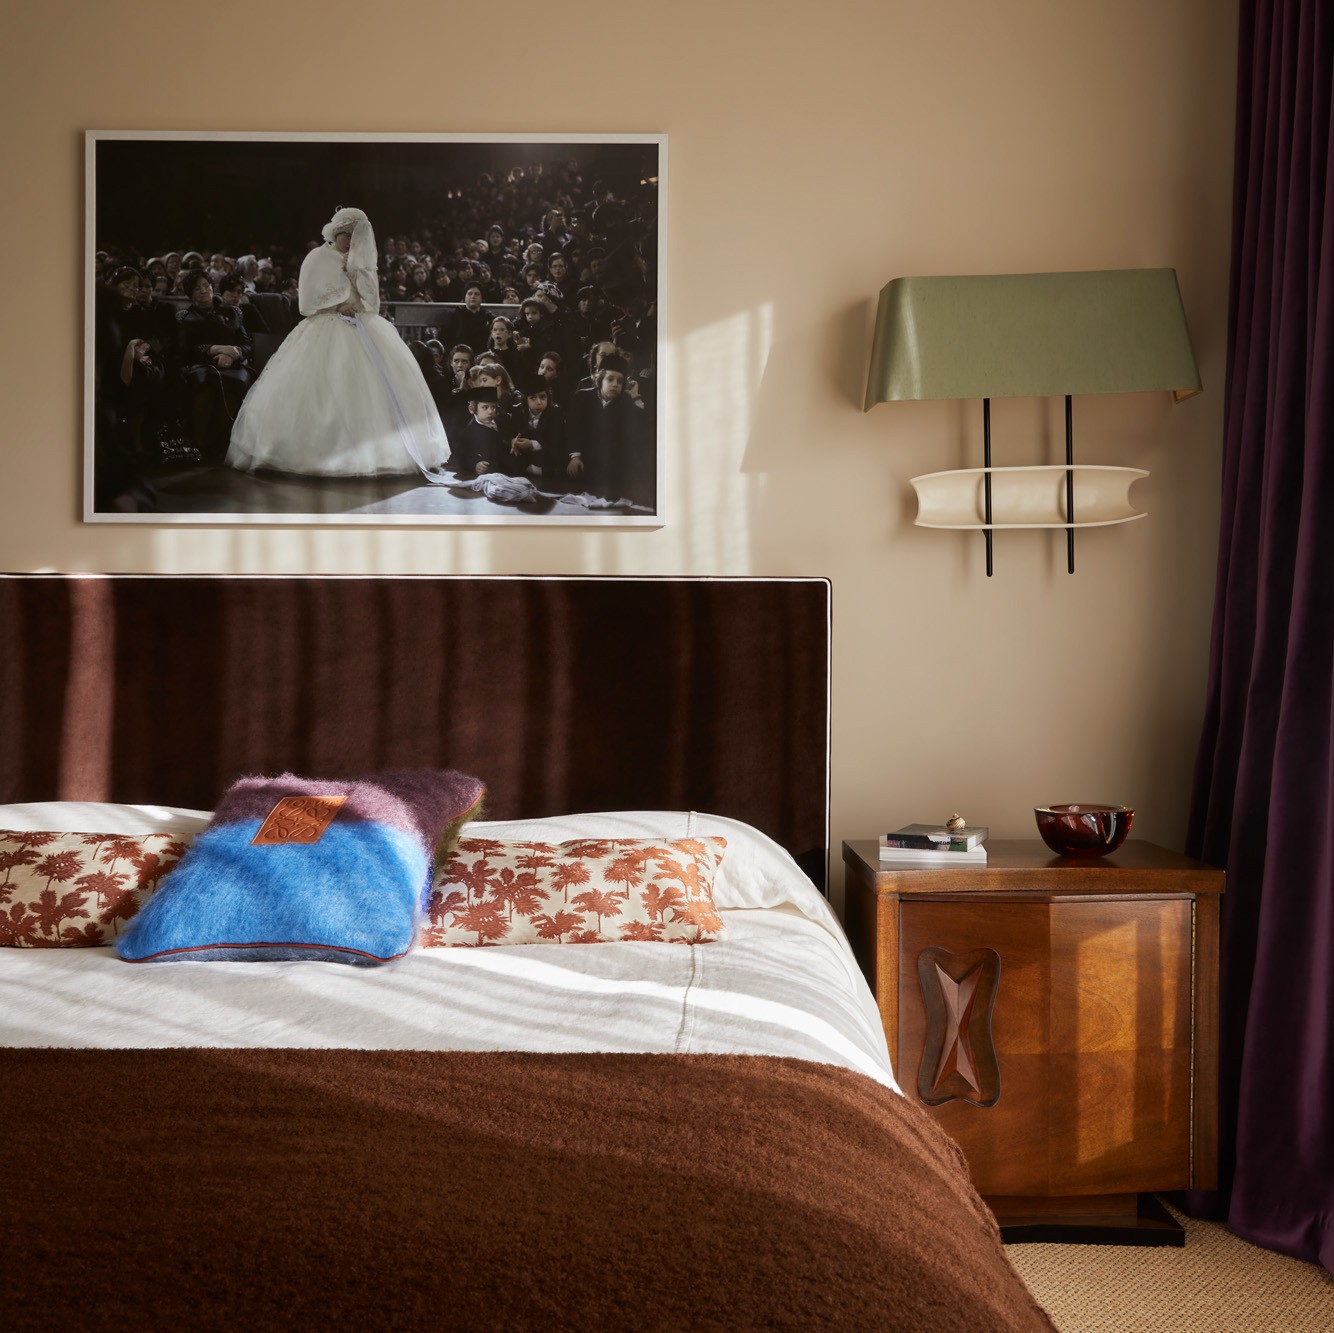 a bed in a bedroom with a picture on the wall